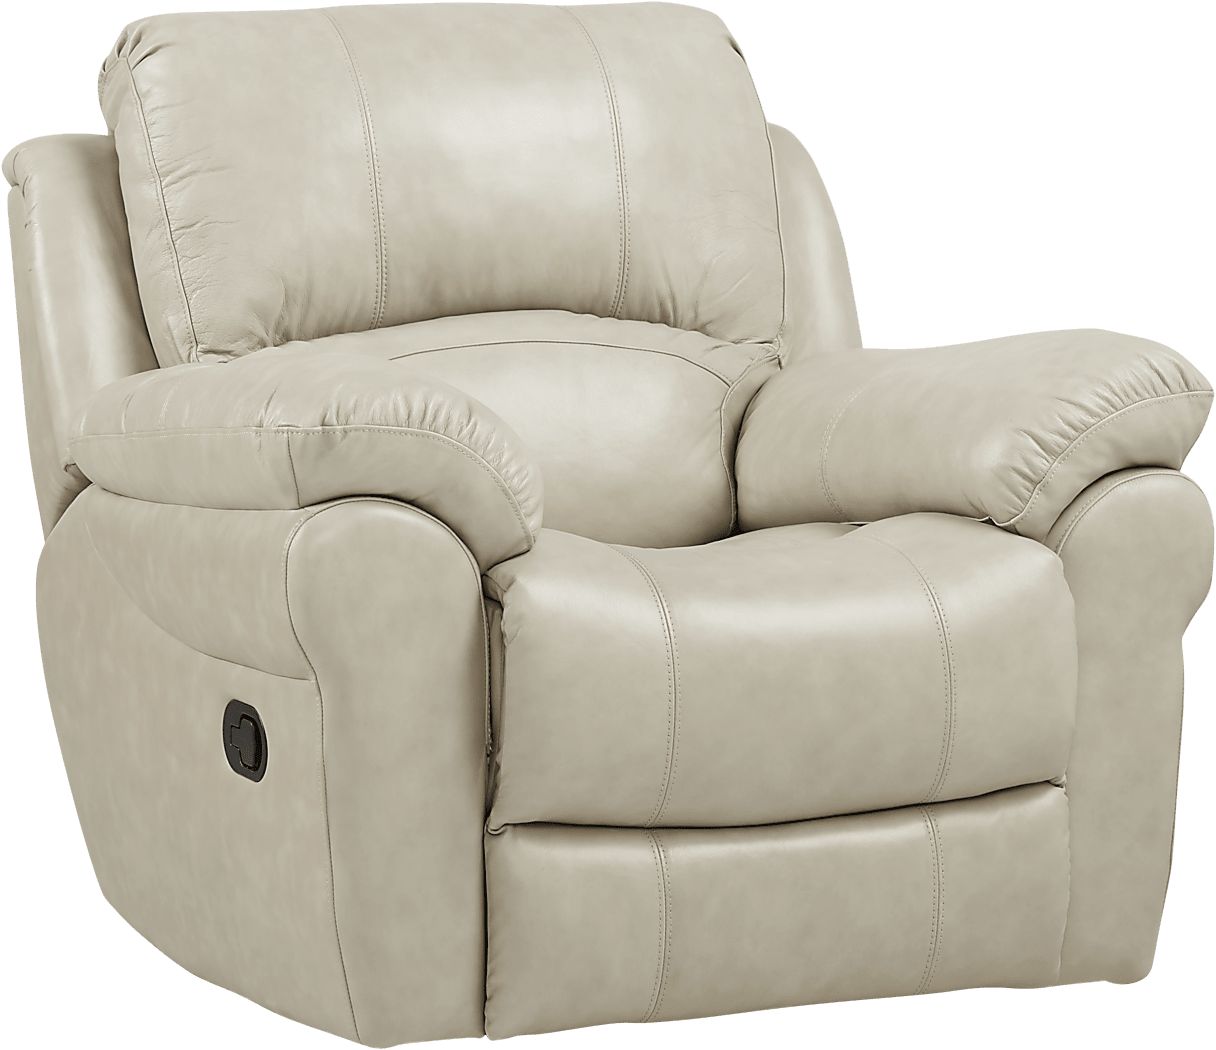 Leather Recliner Stone Vercelli Beige Go To Rocker - Rooms